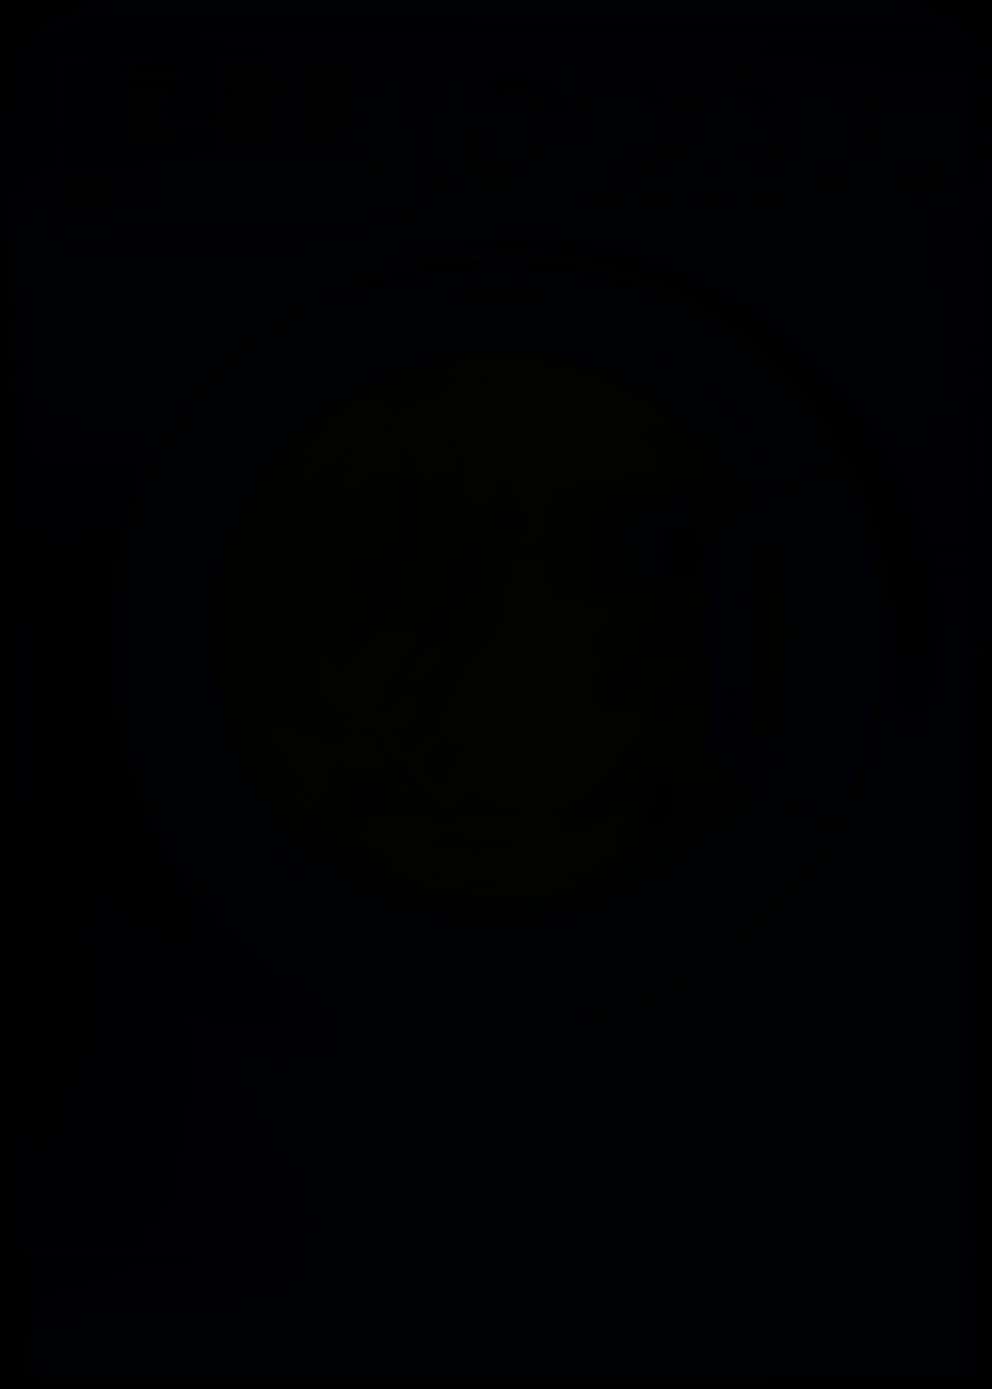 A Black Background With A Circle